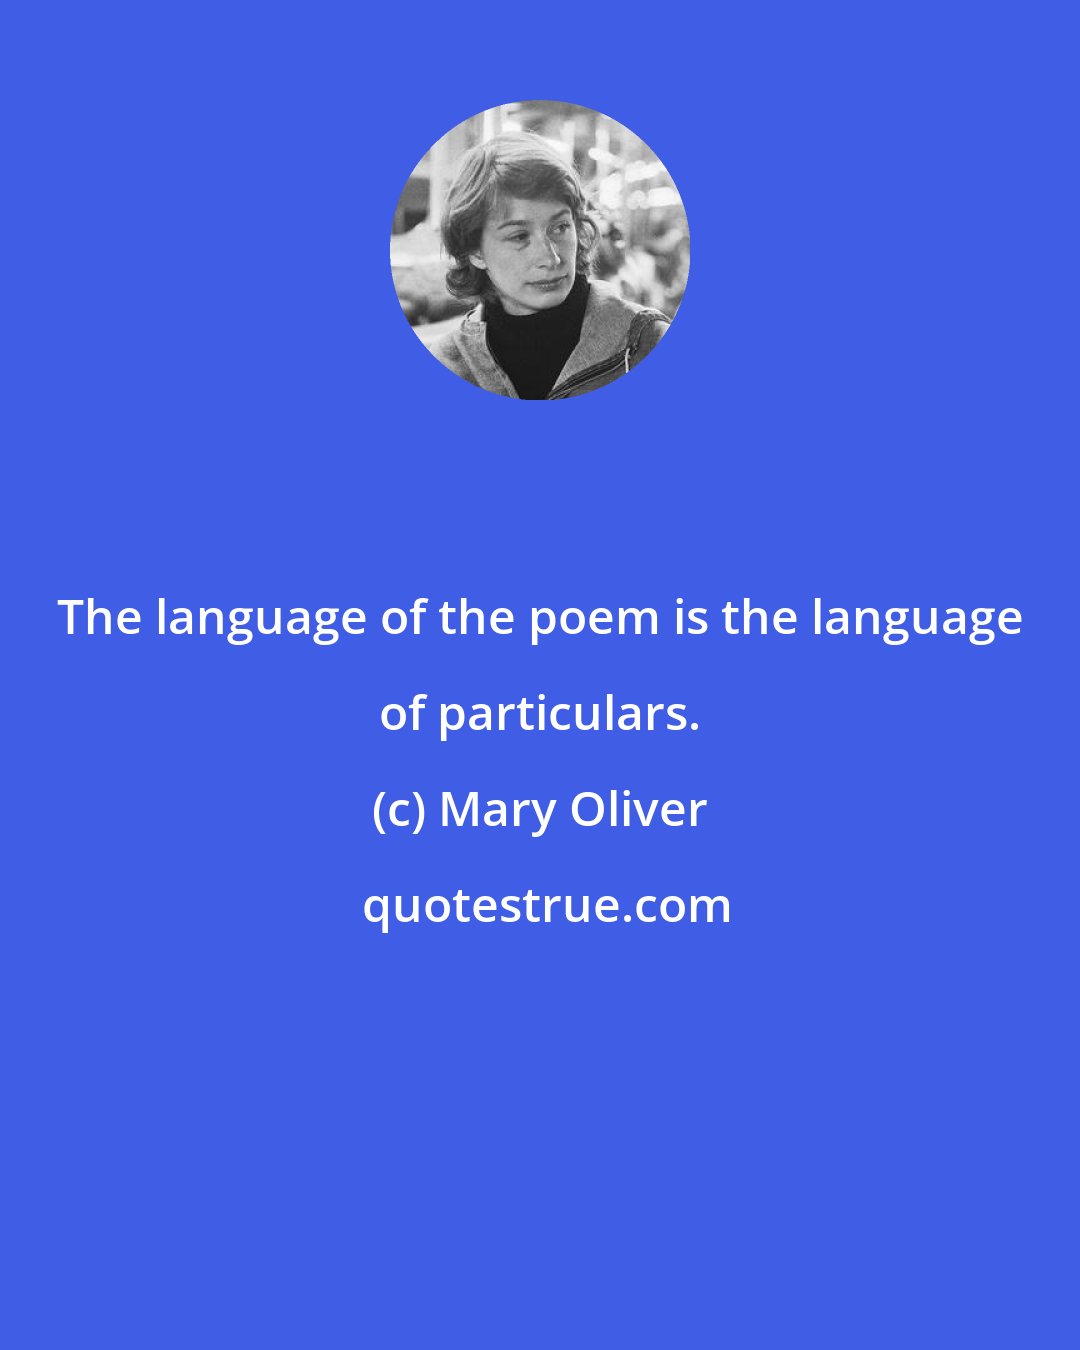 Mary Oliver: The language of the poem is the language of particulars.